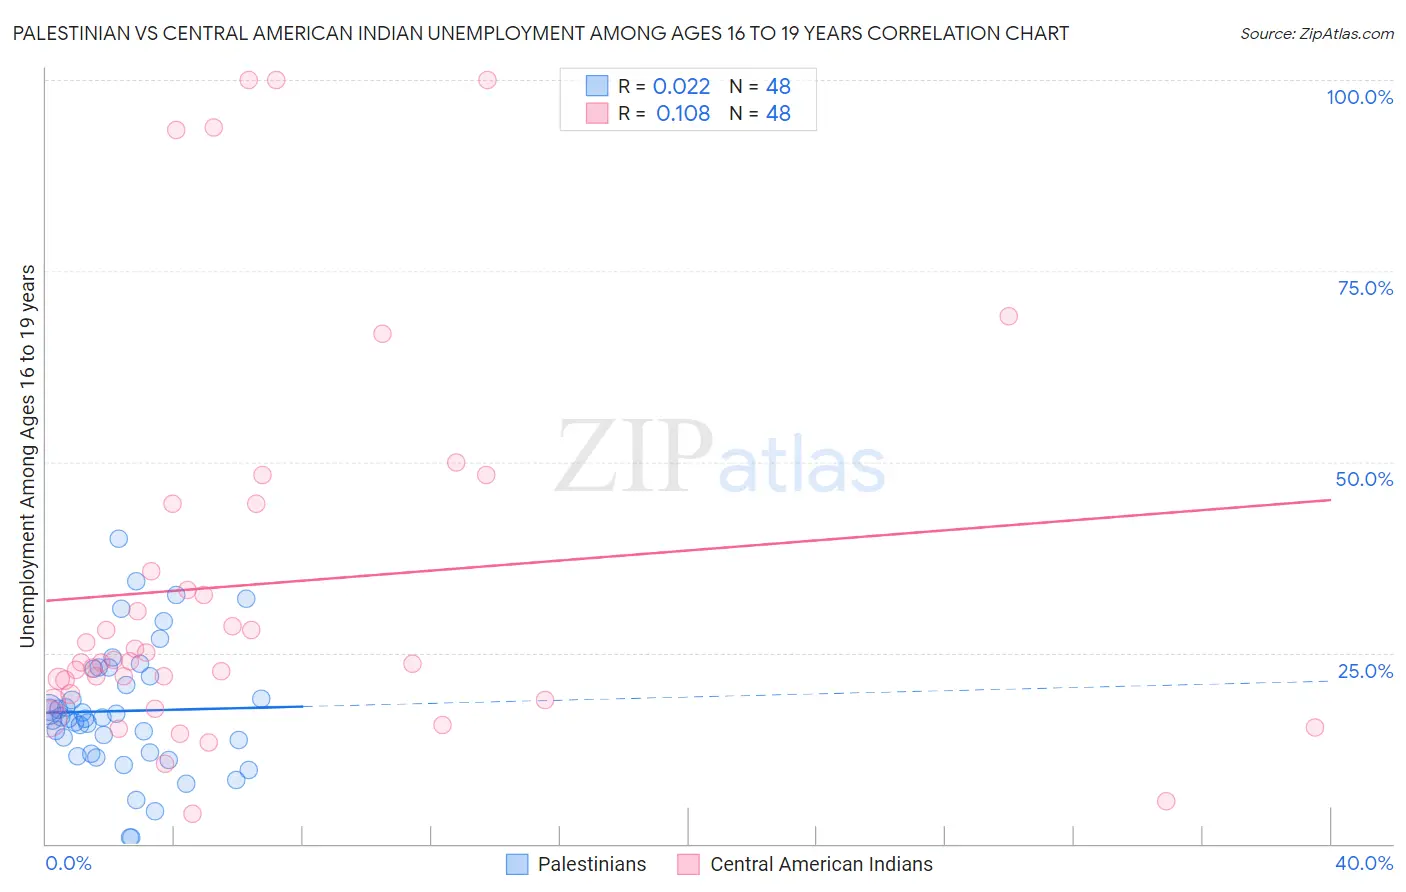 Palestinian vs Central American Indian Unemployment Among Ages 16 to 19 years